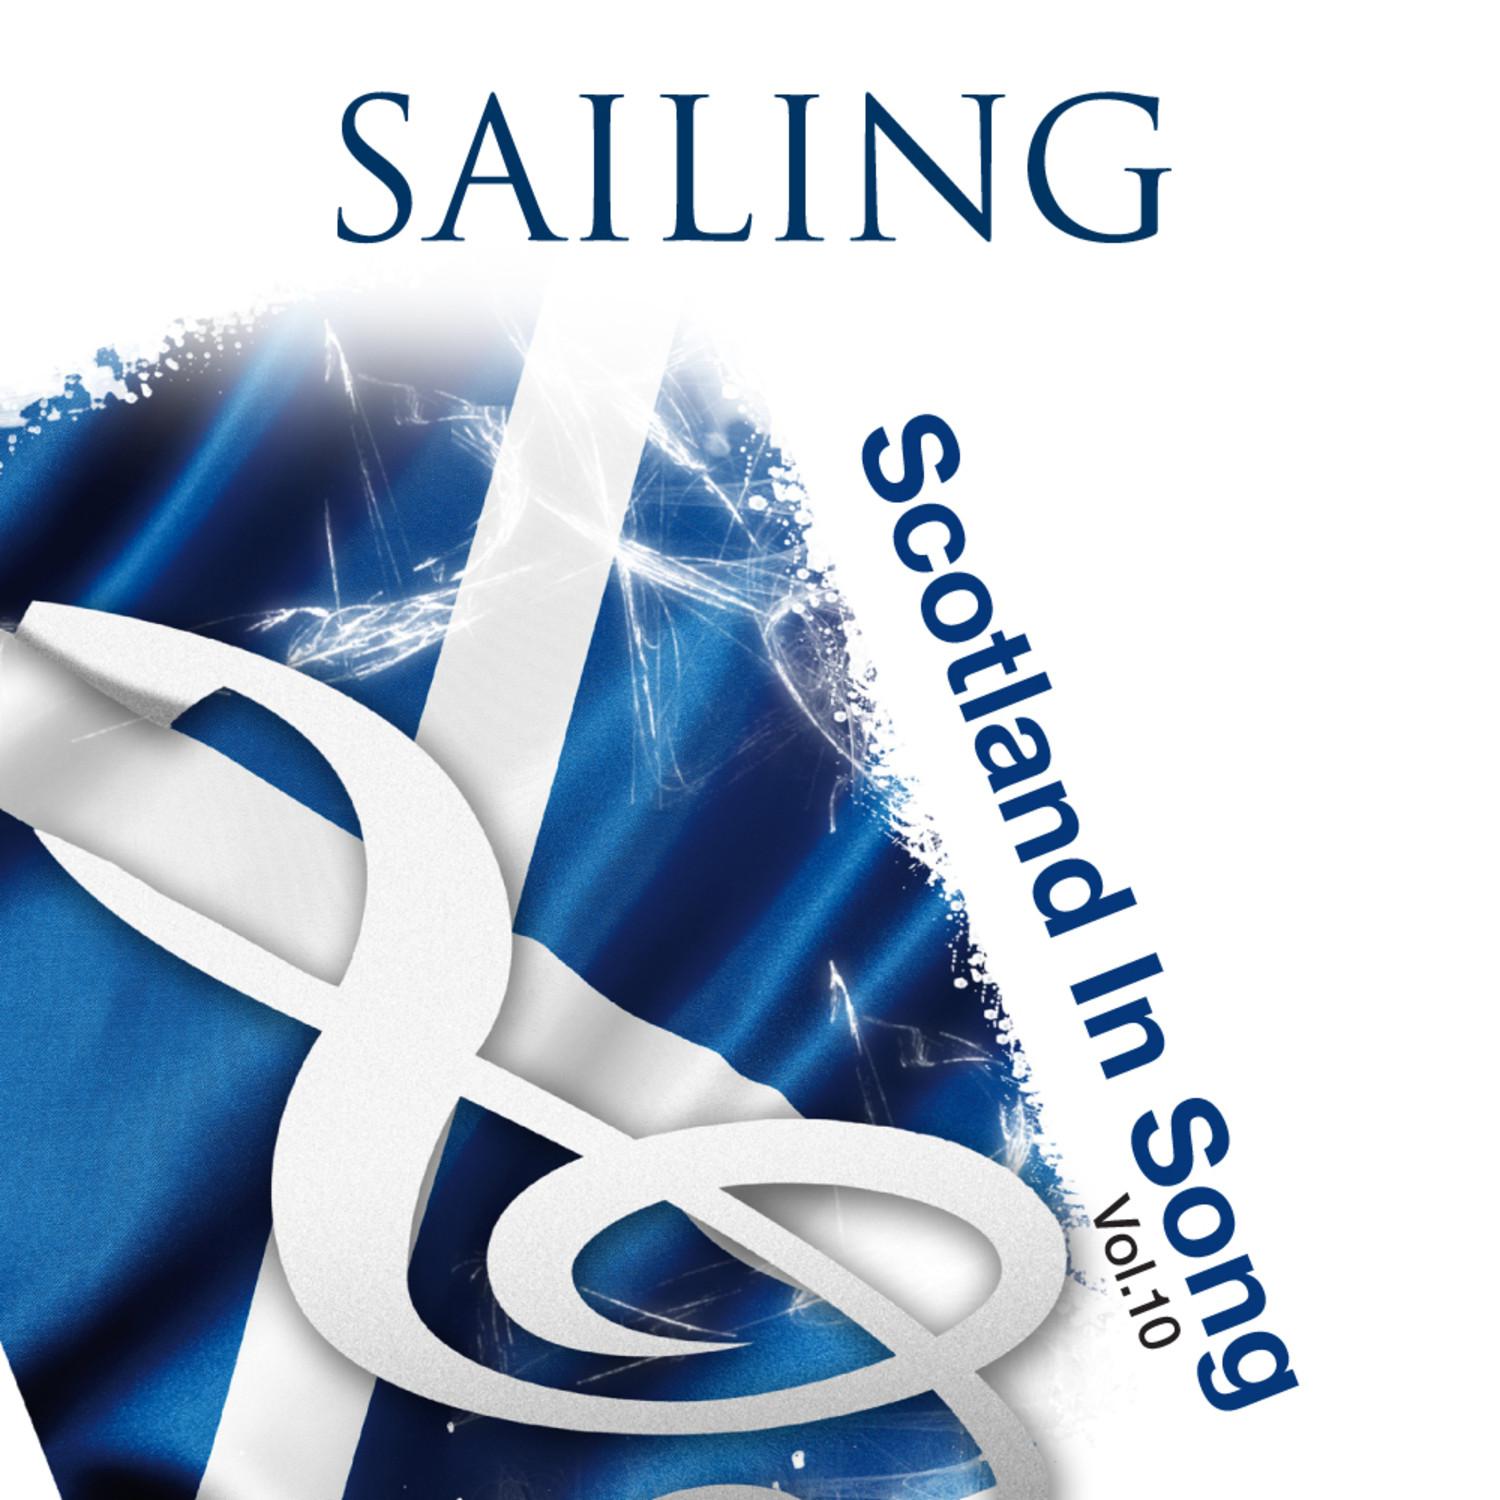 Sailing: Scotland In Song Volume 10